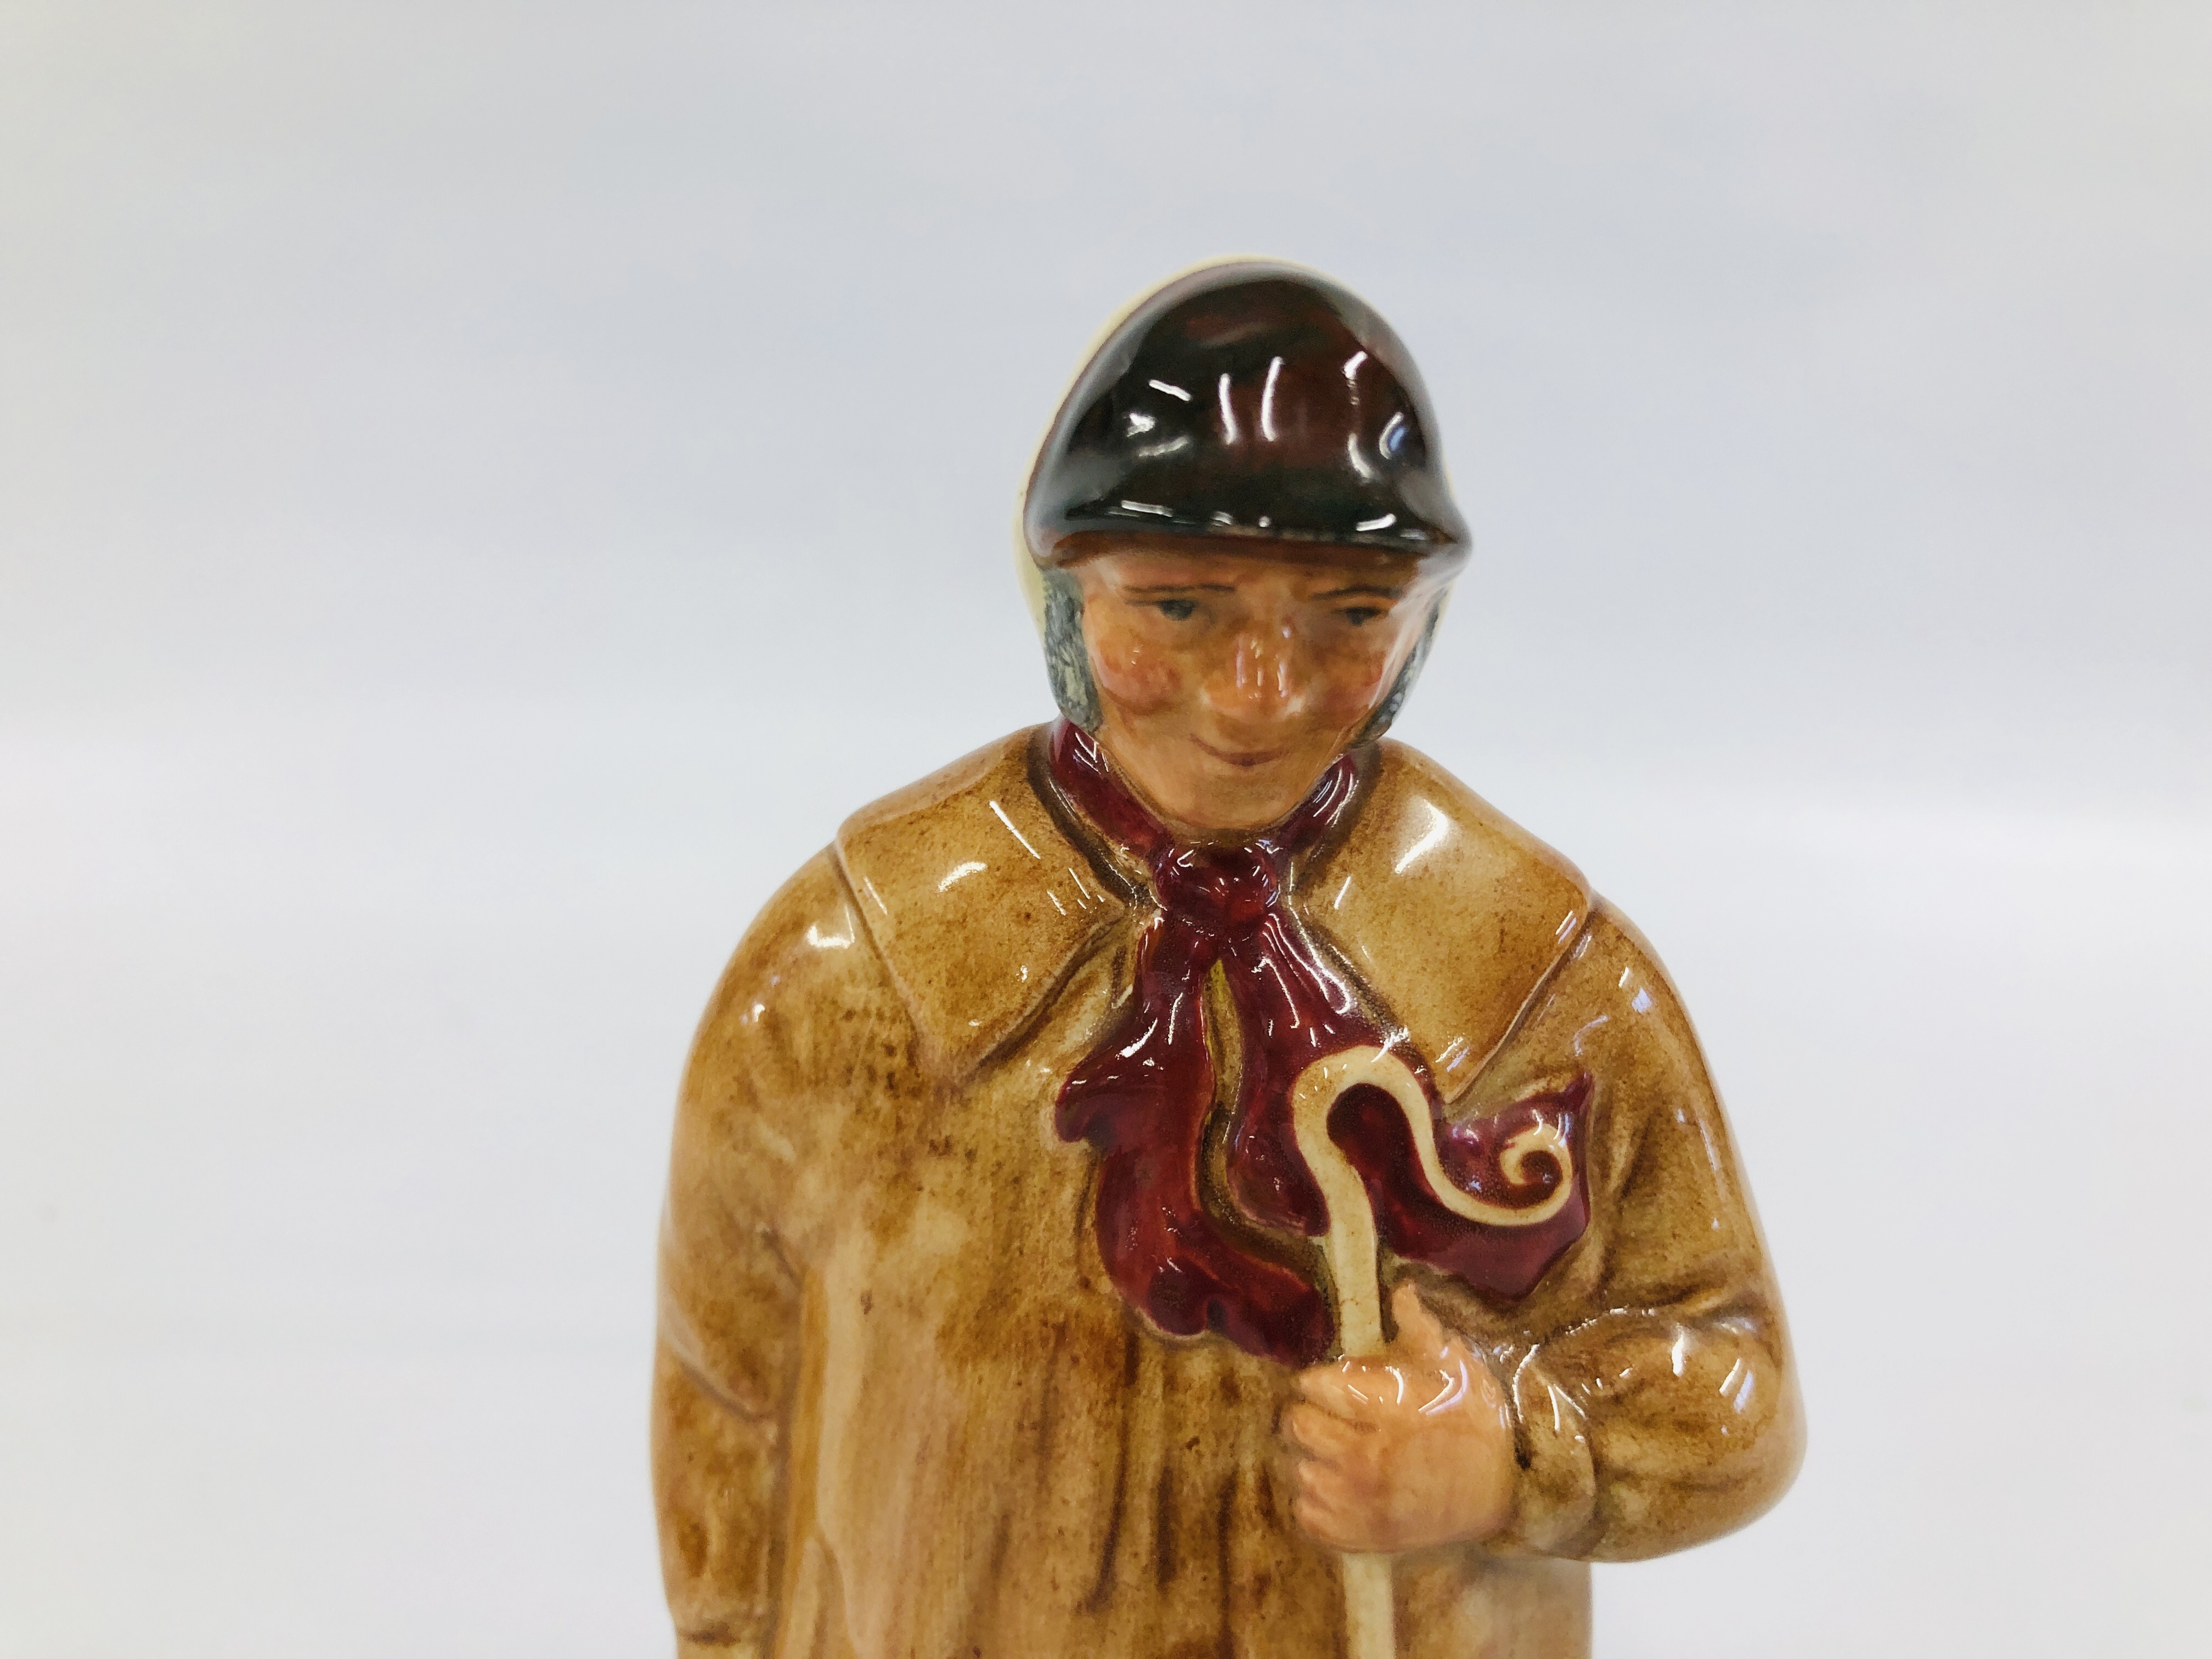 ROYAL DOULTON FIGURE OF "THE SHEPHERD" H.N. 1975 R NO. 842485 22CM H. - Image 2 of 7